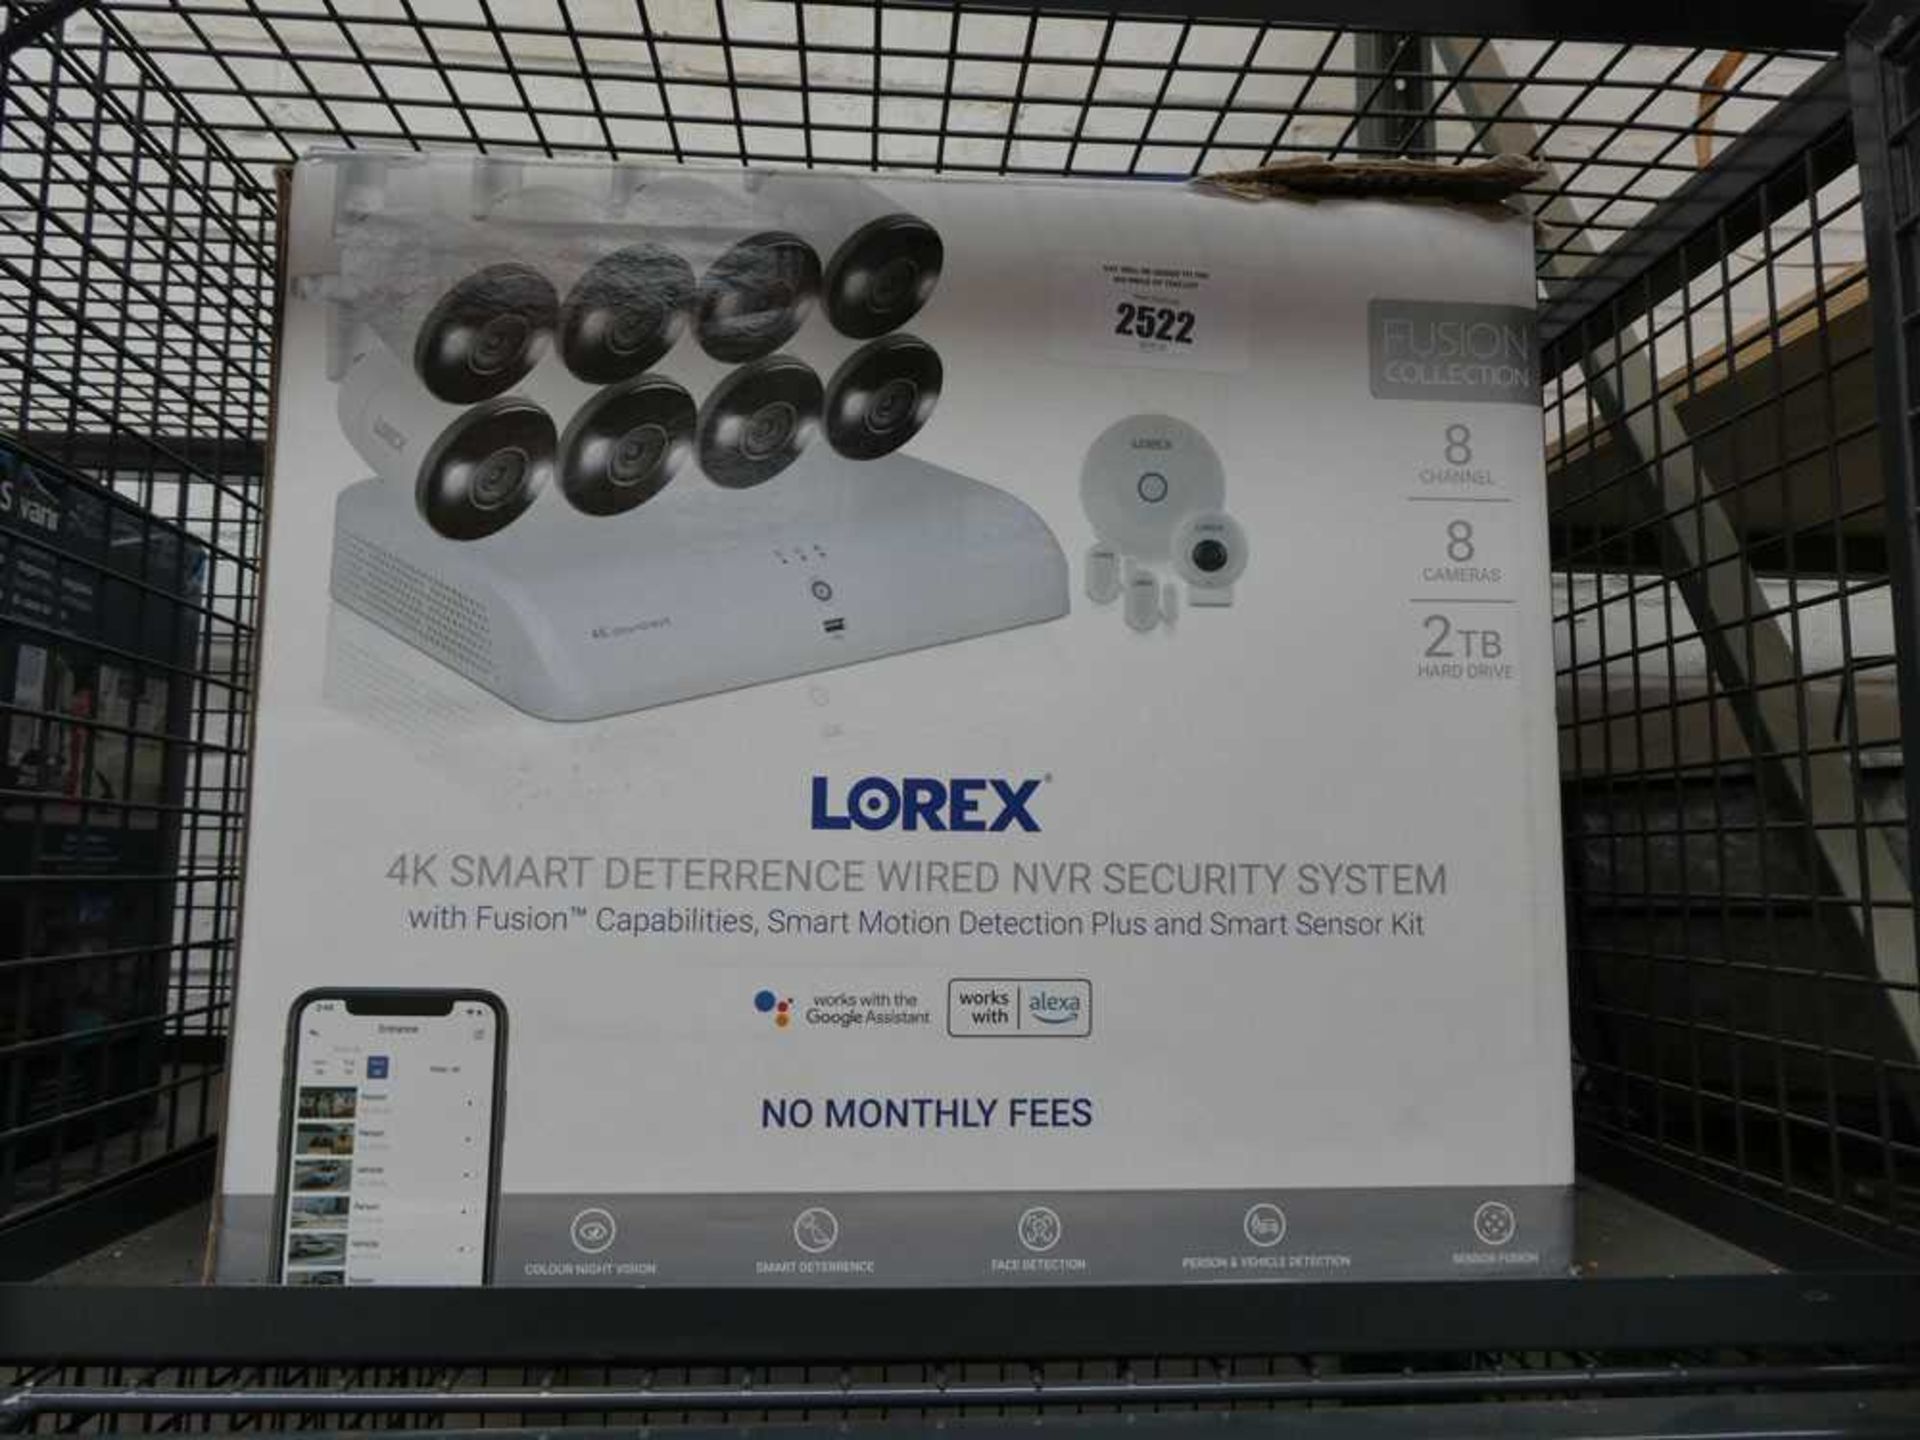 +VAT Boxed Lorex 4K Smart deterrence wired NVR 8 channel security system